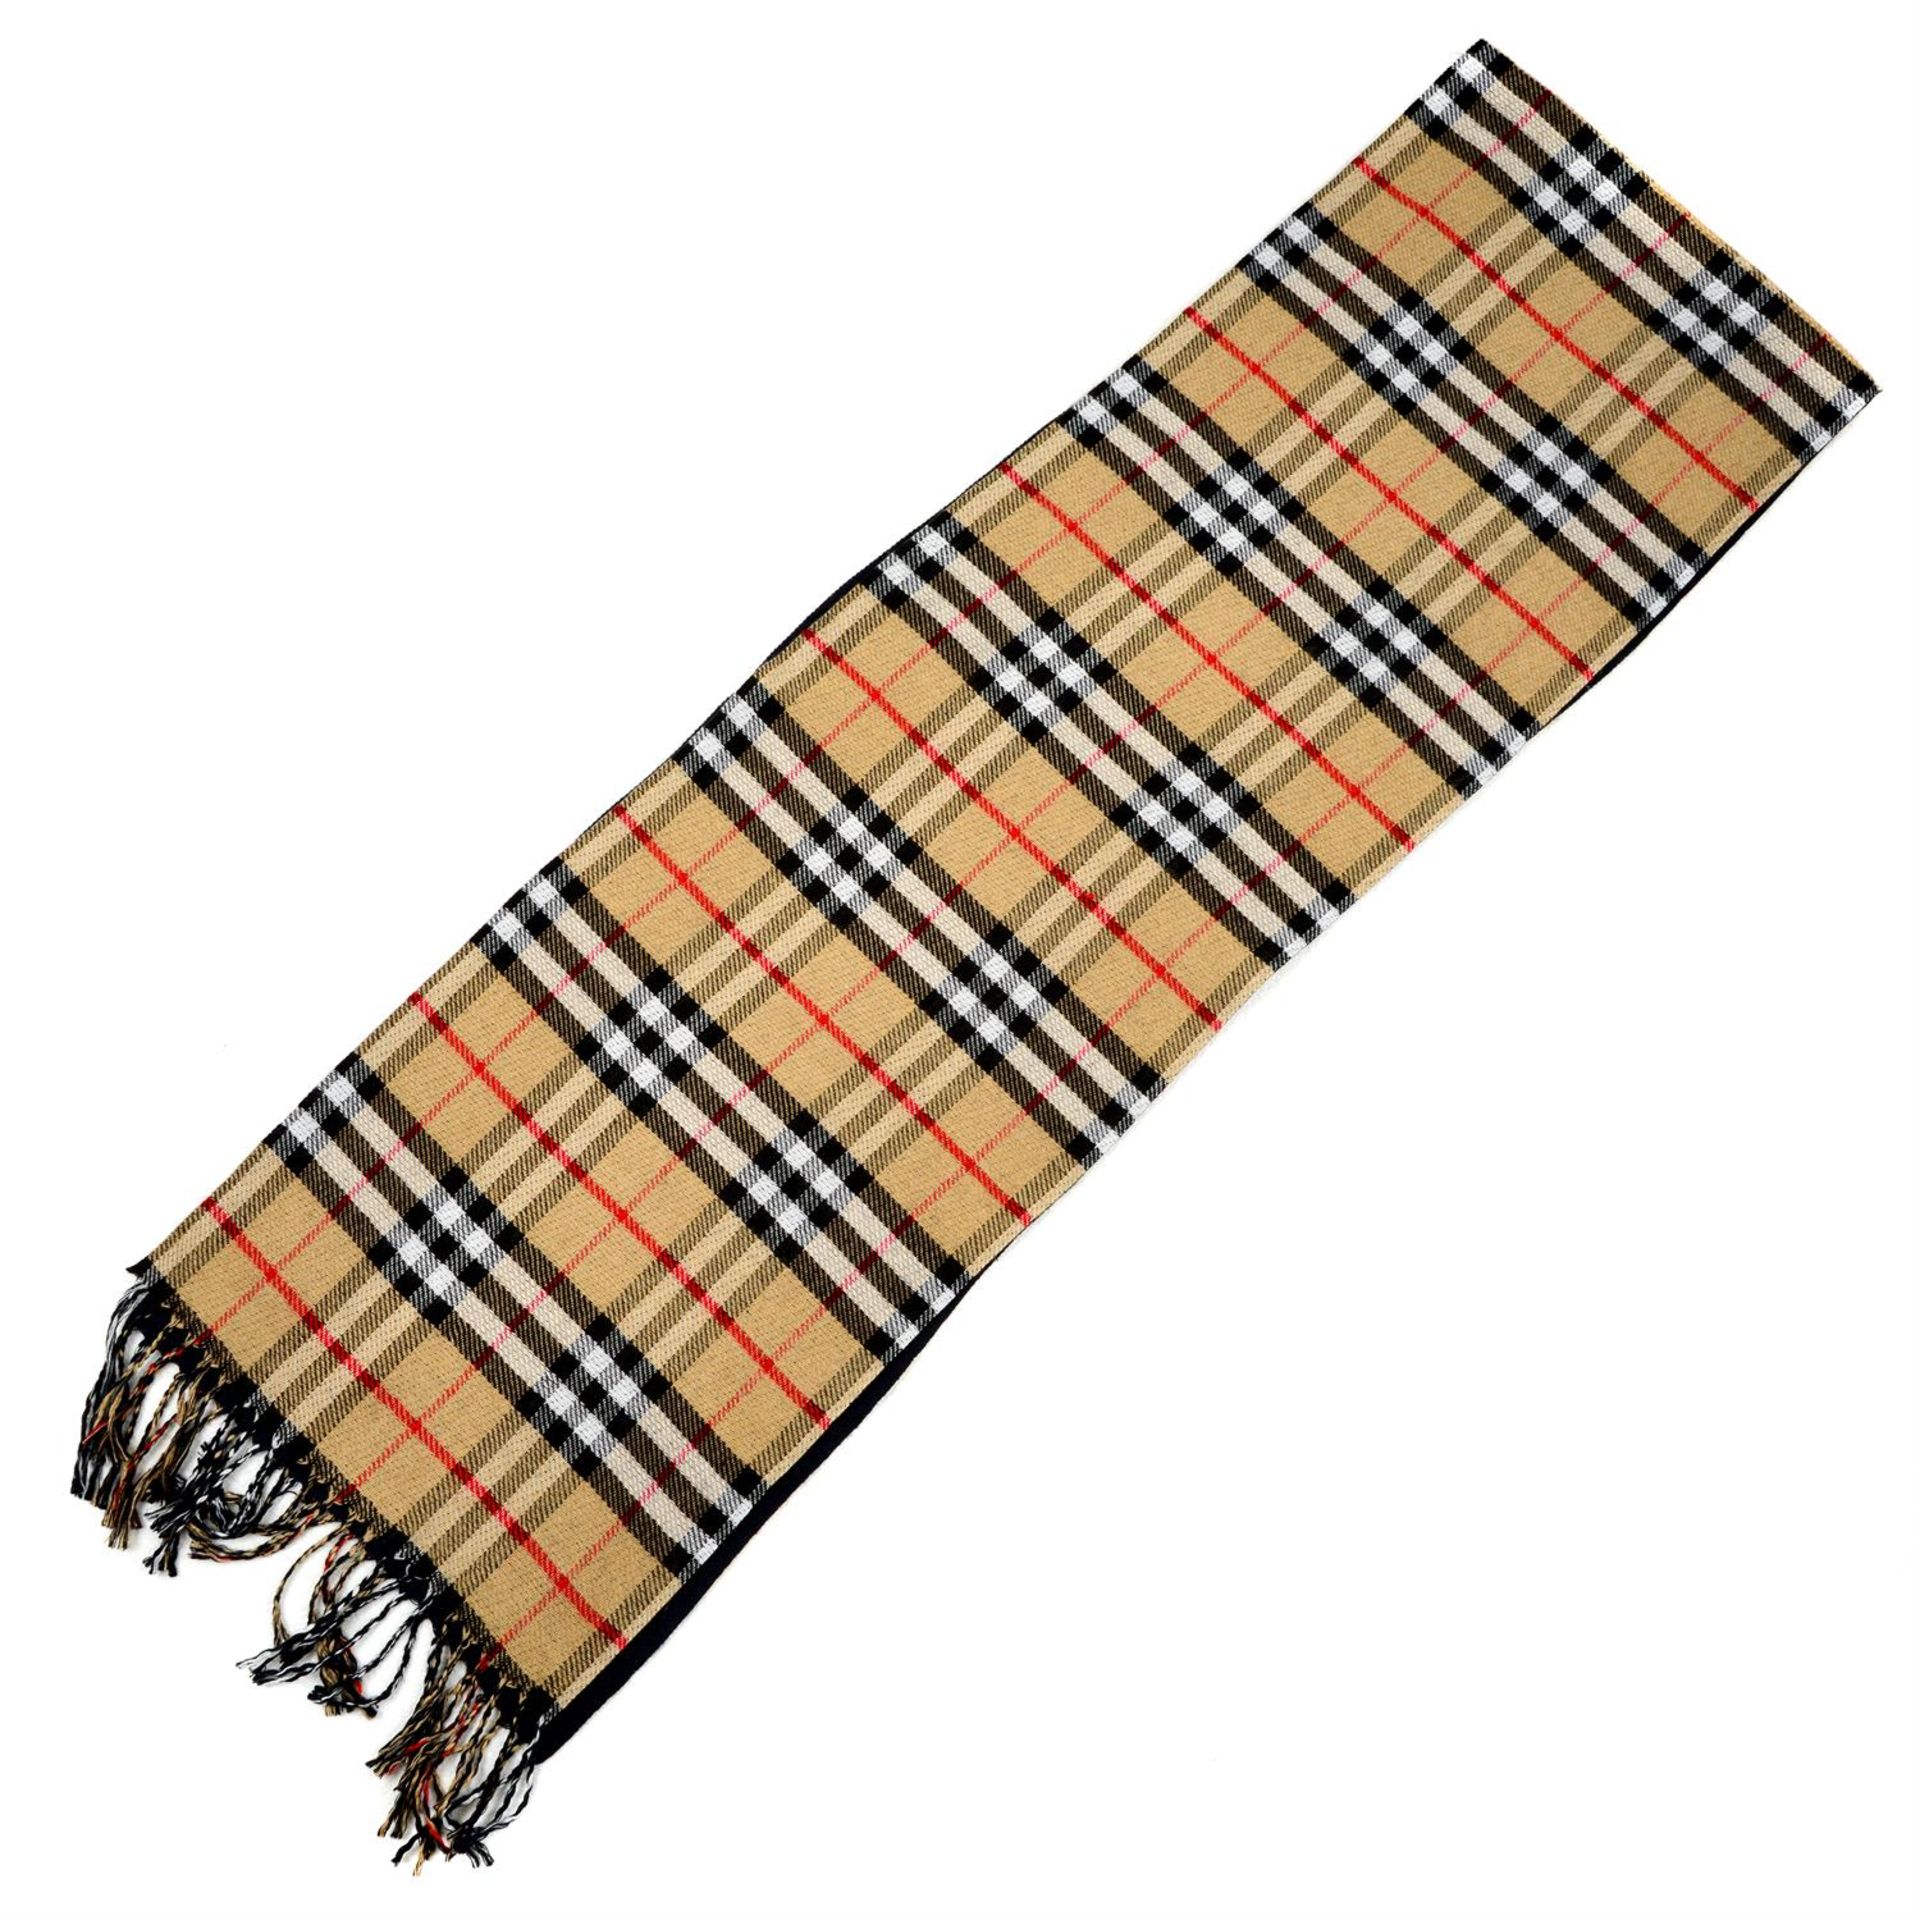 BURBERRY - a reversible Nova check wool scarf. - Image 2 of 2